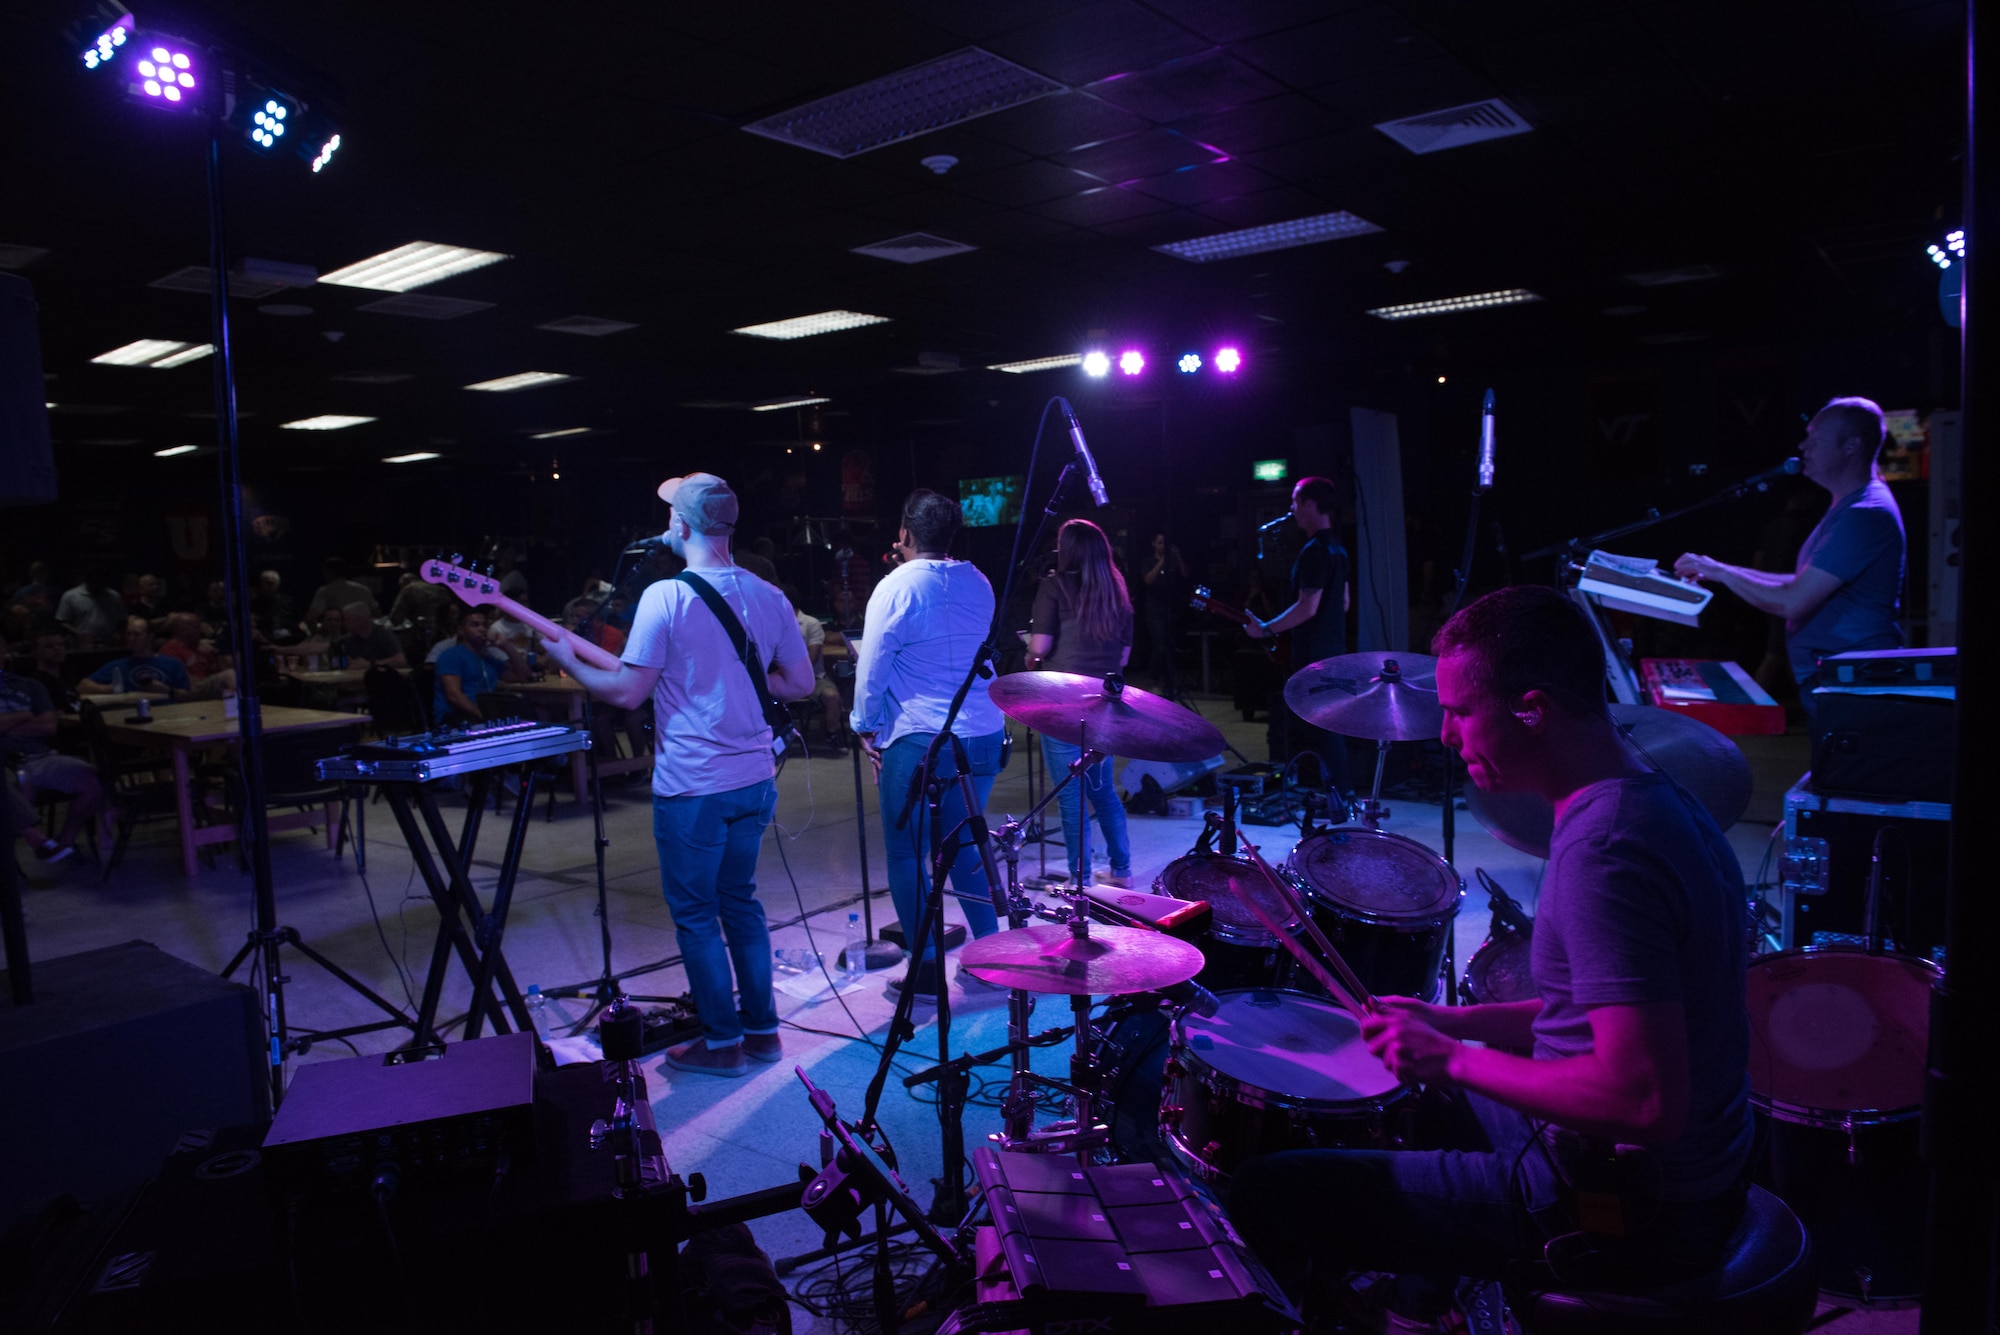 The AFCENT Band performs for a packed room full of U.S. and joint Coalition forces at an undisclosed location in Southwest Asia, August 7, 2017. The band’s high energy show and follow-on live band karaoke brought 386th Air Expeditionary Wing members and joint Coalition partners together for two nights of fun, laughter and fellowship.  (U.S. Air Force photo by Tech. Sgt. Jonathan Hehnly)